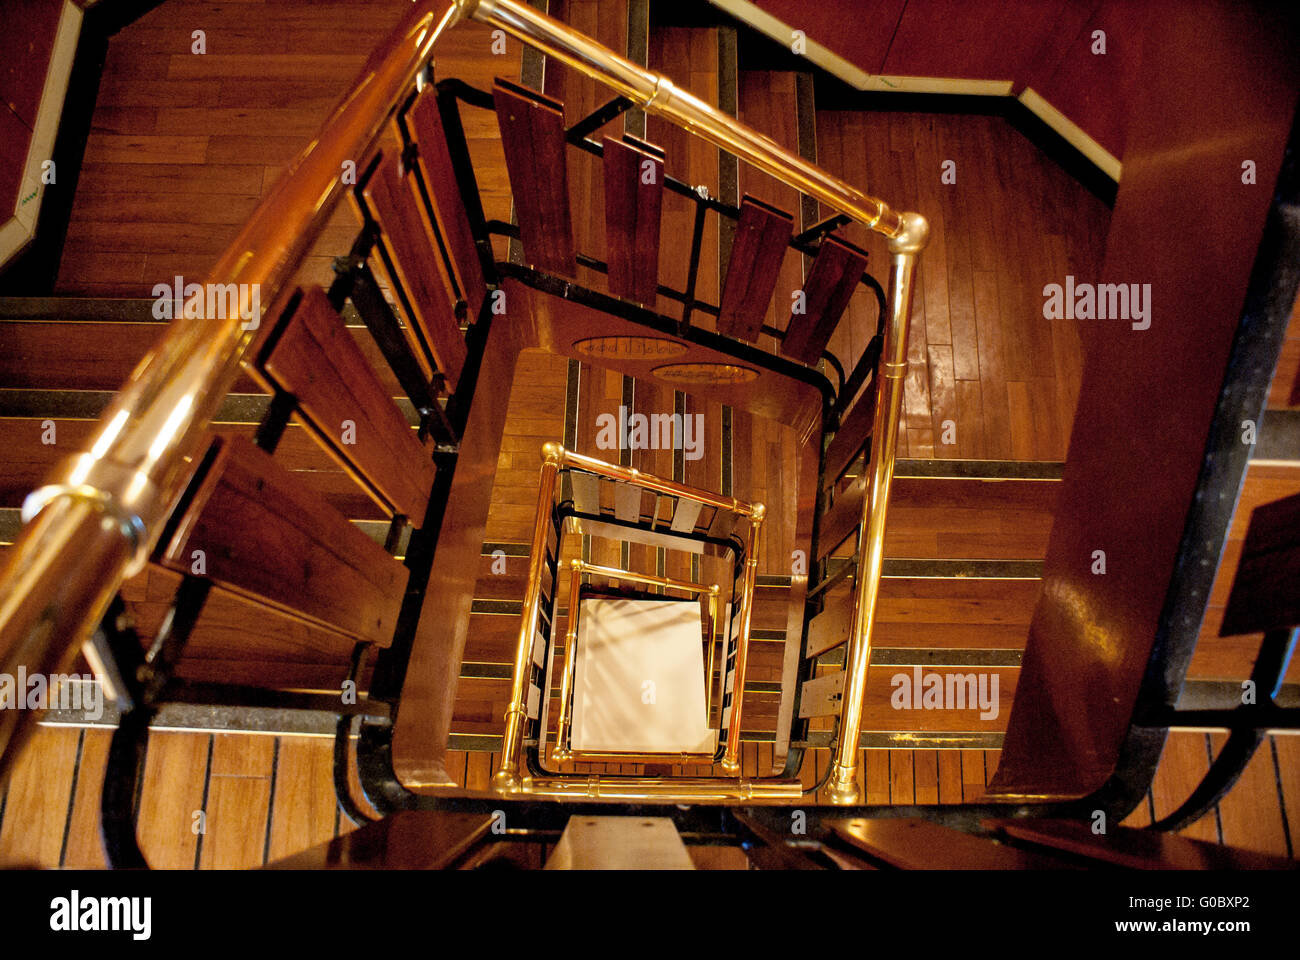 Inside Of The Old Ship Stock Photo 103524682 Alamy